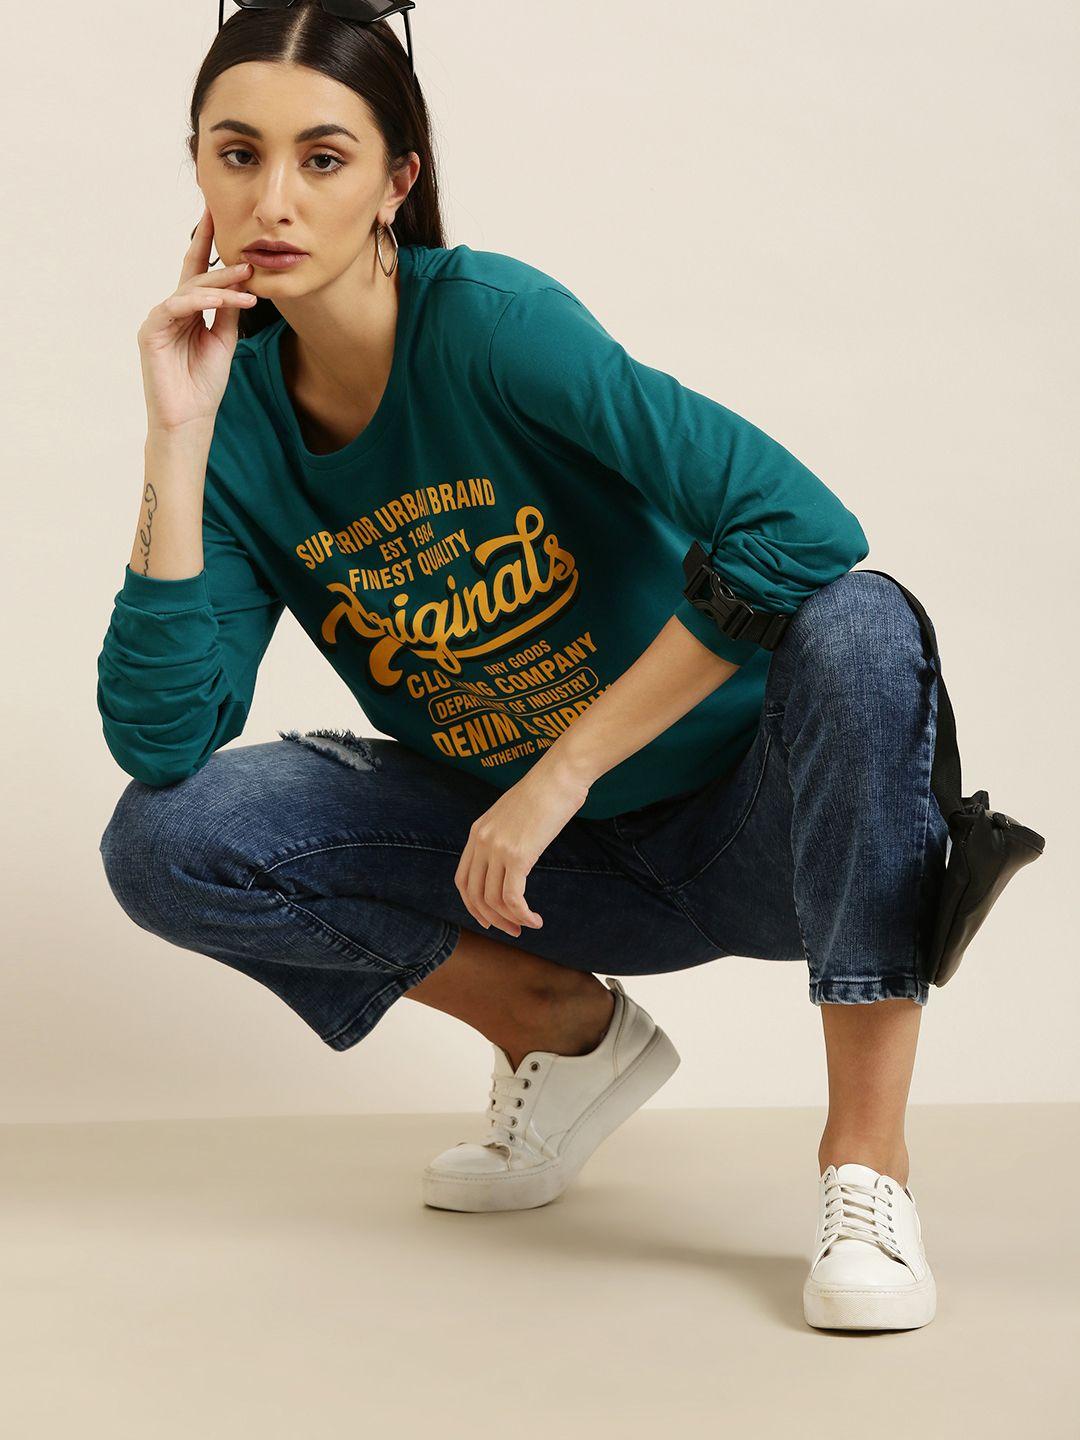 dillinger-women-teal-green-typography-printed-pure-cotton-oversized--t-shirt